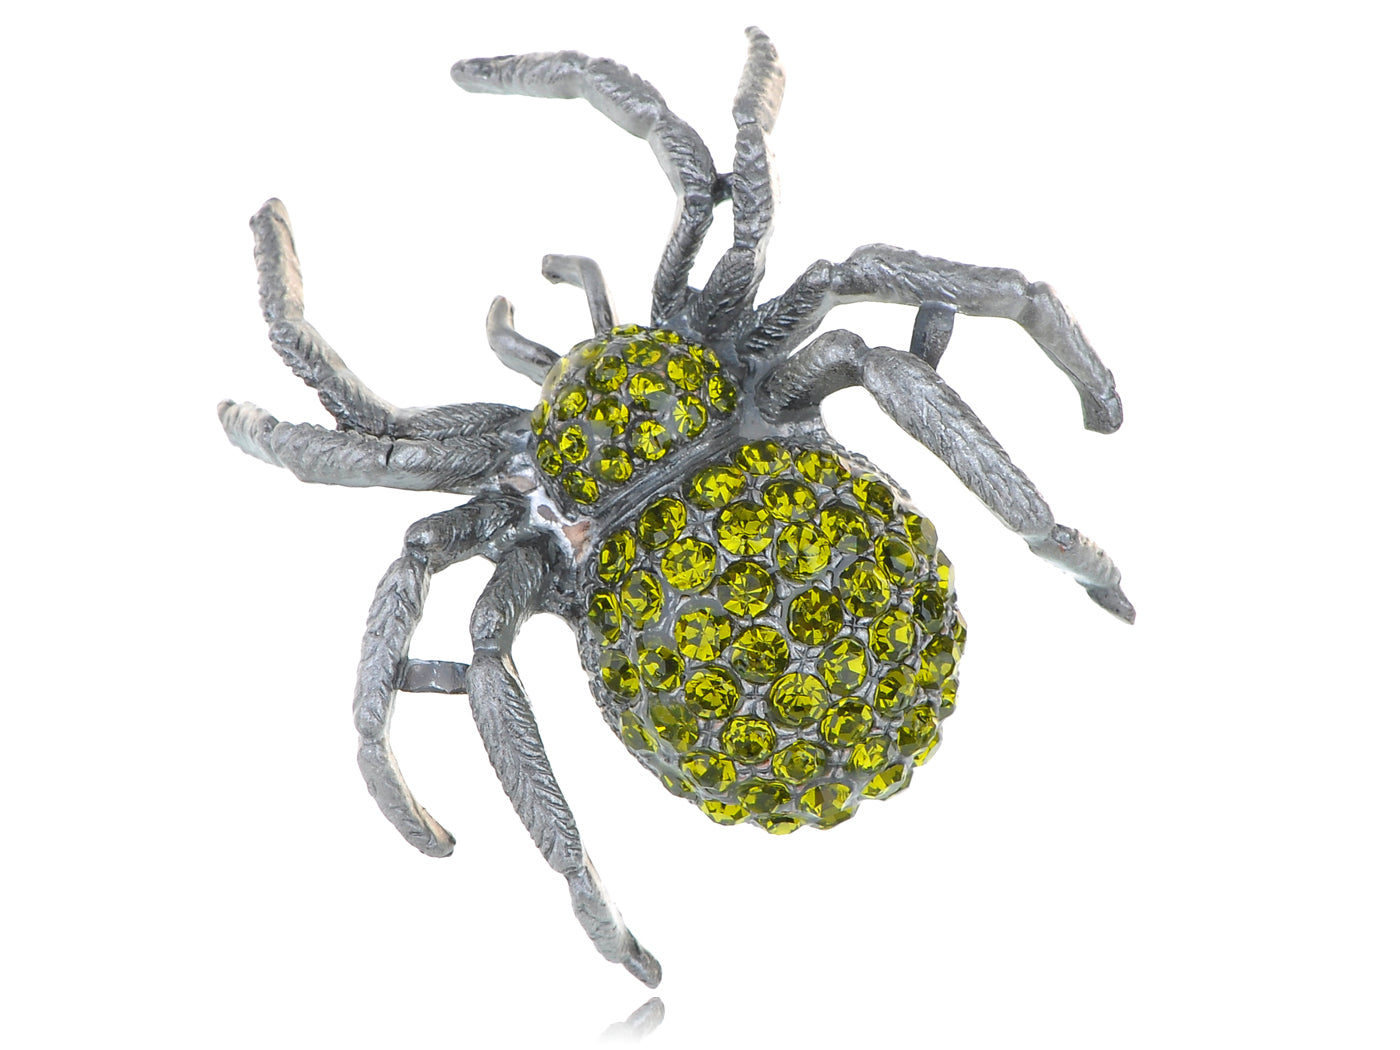 Vintage Repro Peridot Spider Jewelry Pin Brooch